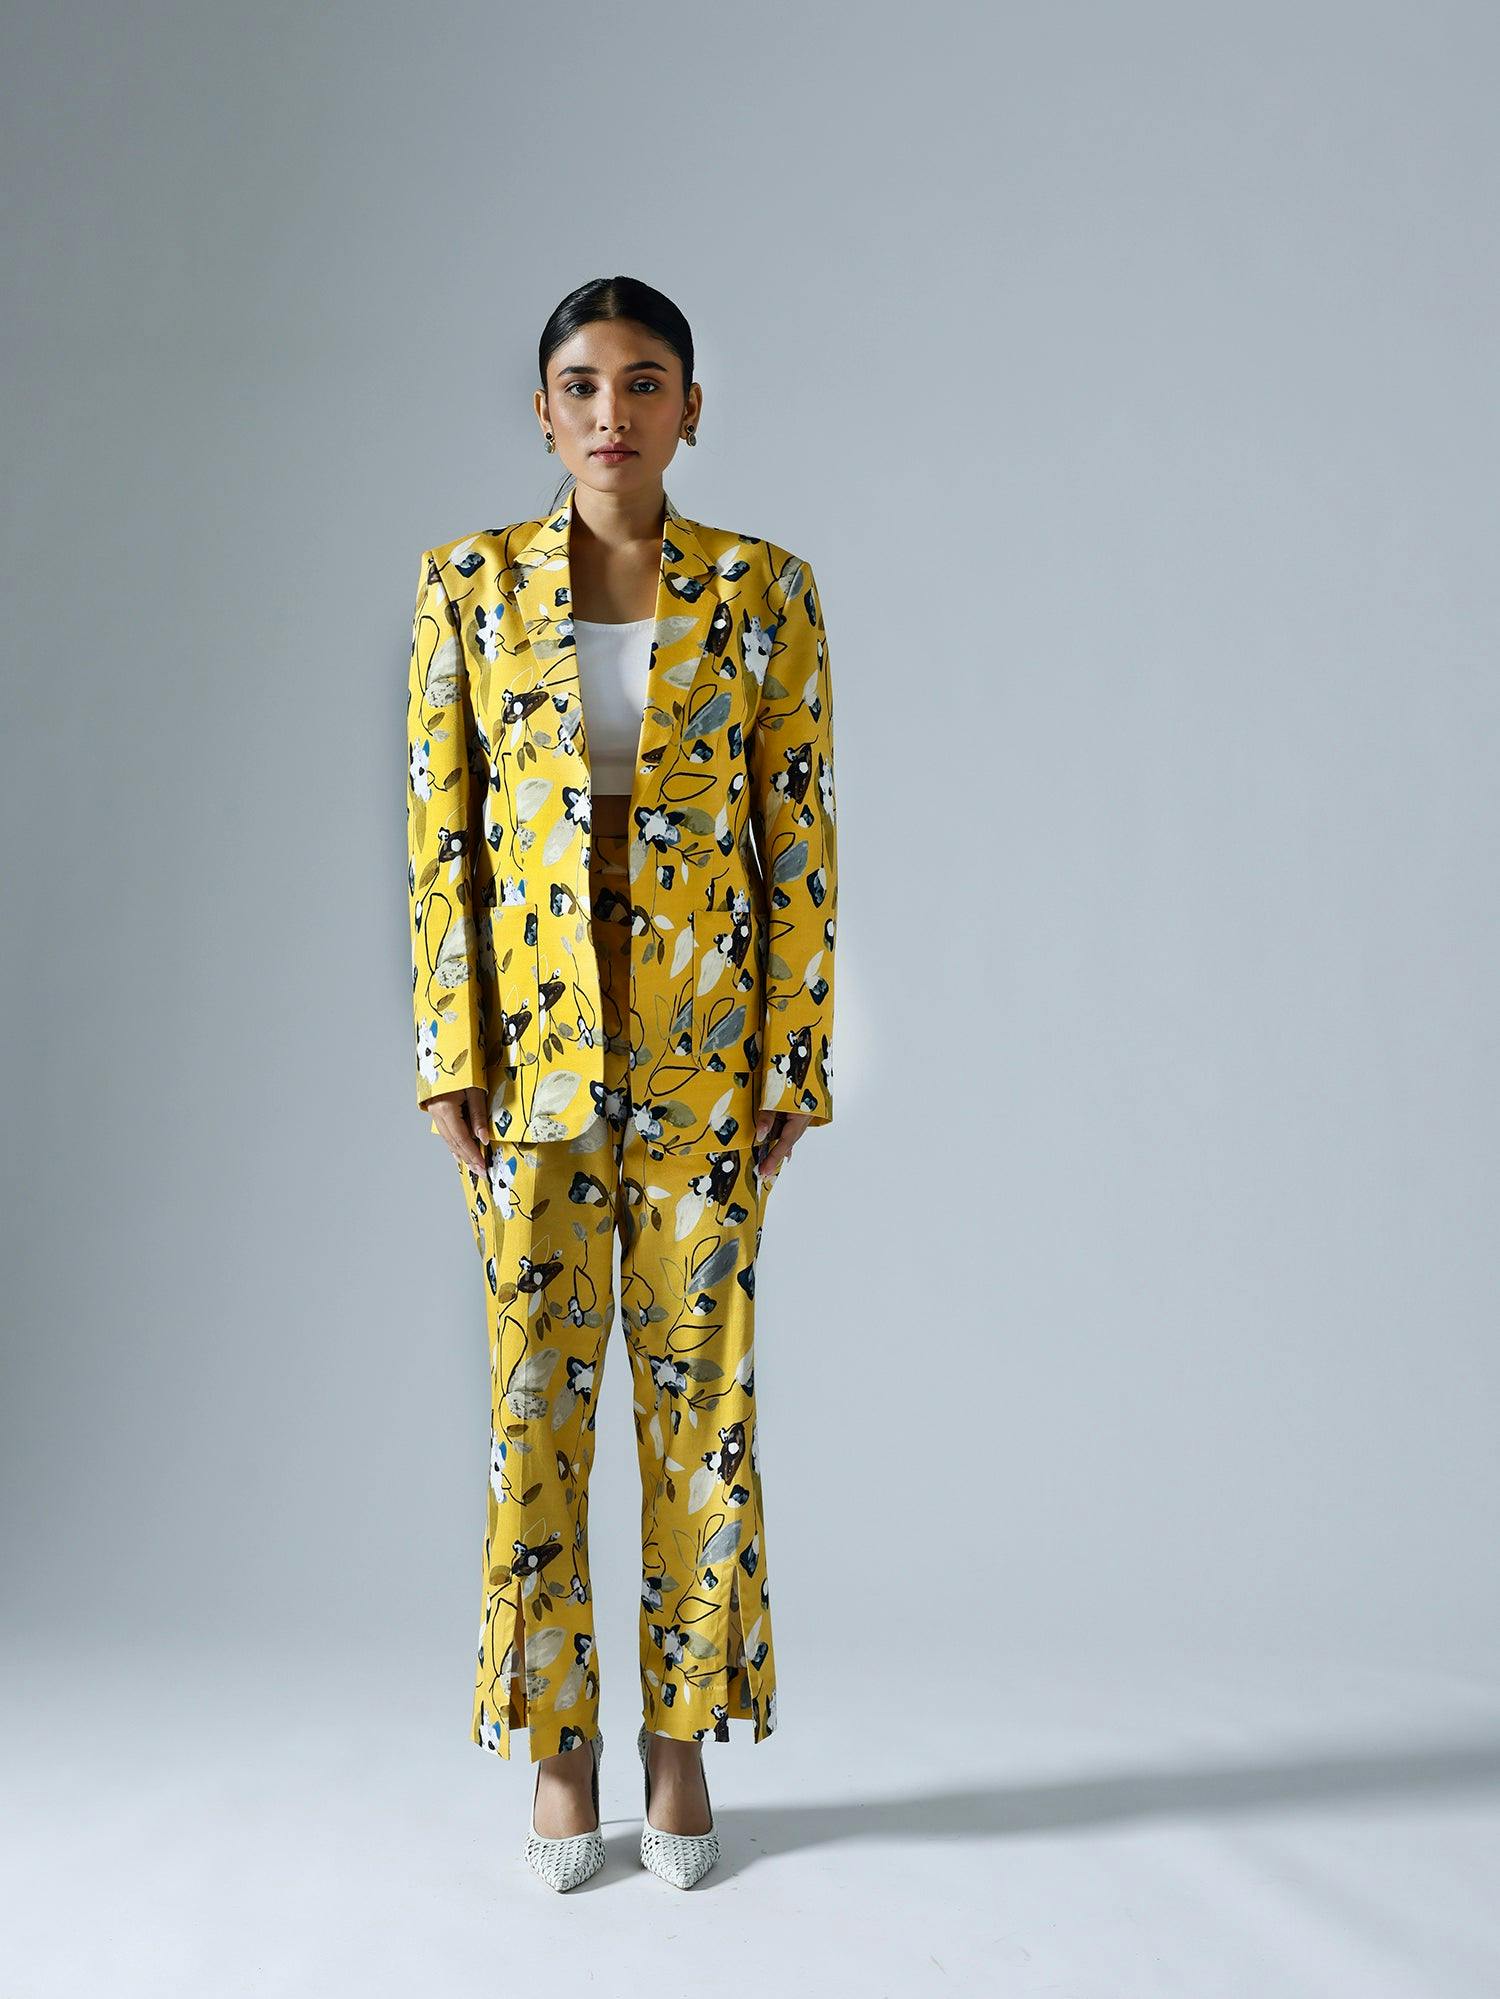 Thumbnail preview #1 for Vivid Yellow Pant Suit